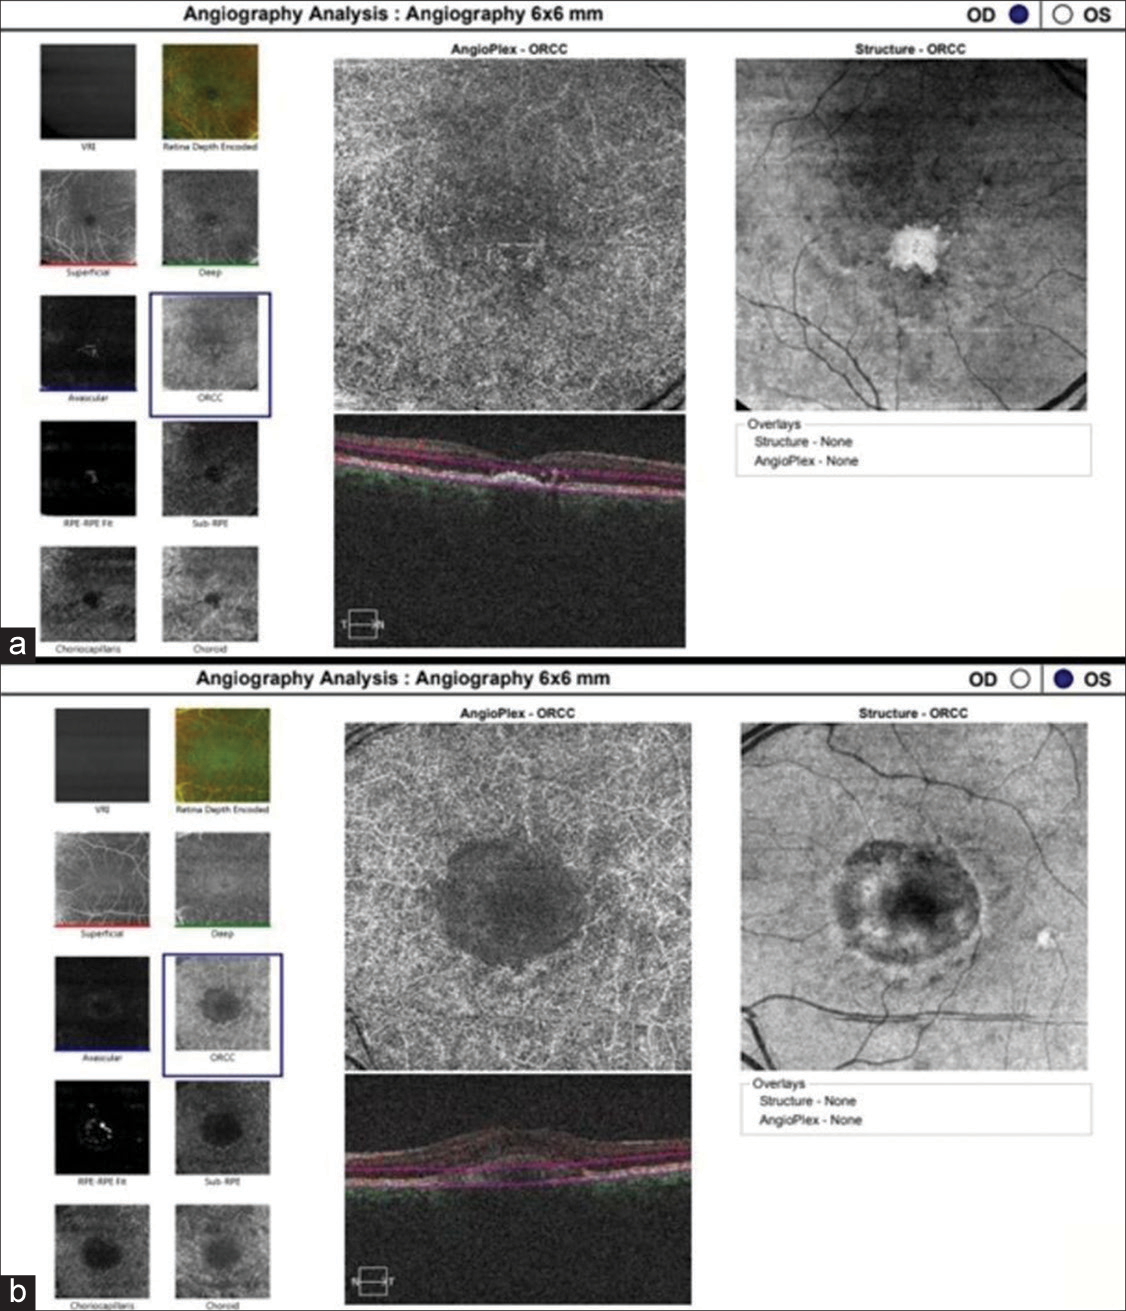 (a) Optical coherence tomography angiography of outer retina to choriocapillaris zone of the right eye, (b) left eye demonstrating no evidence of any vascular network or other vascular abnormality. OD: oculus dexter (right eye), OS: oculus sinister (left eye), ORCC: outer retina to choriocapillaris.